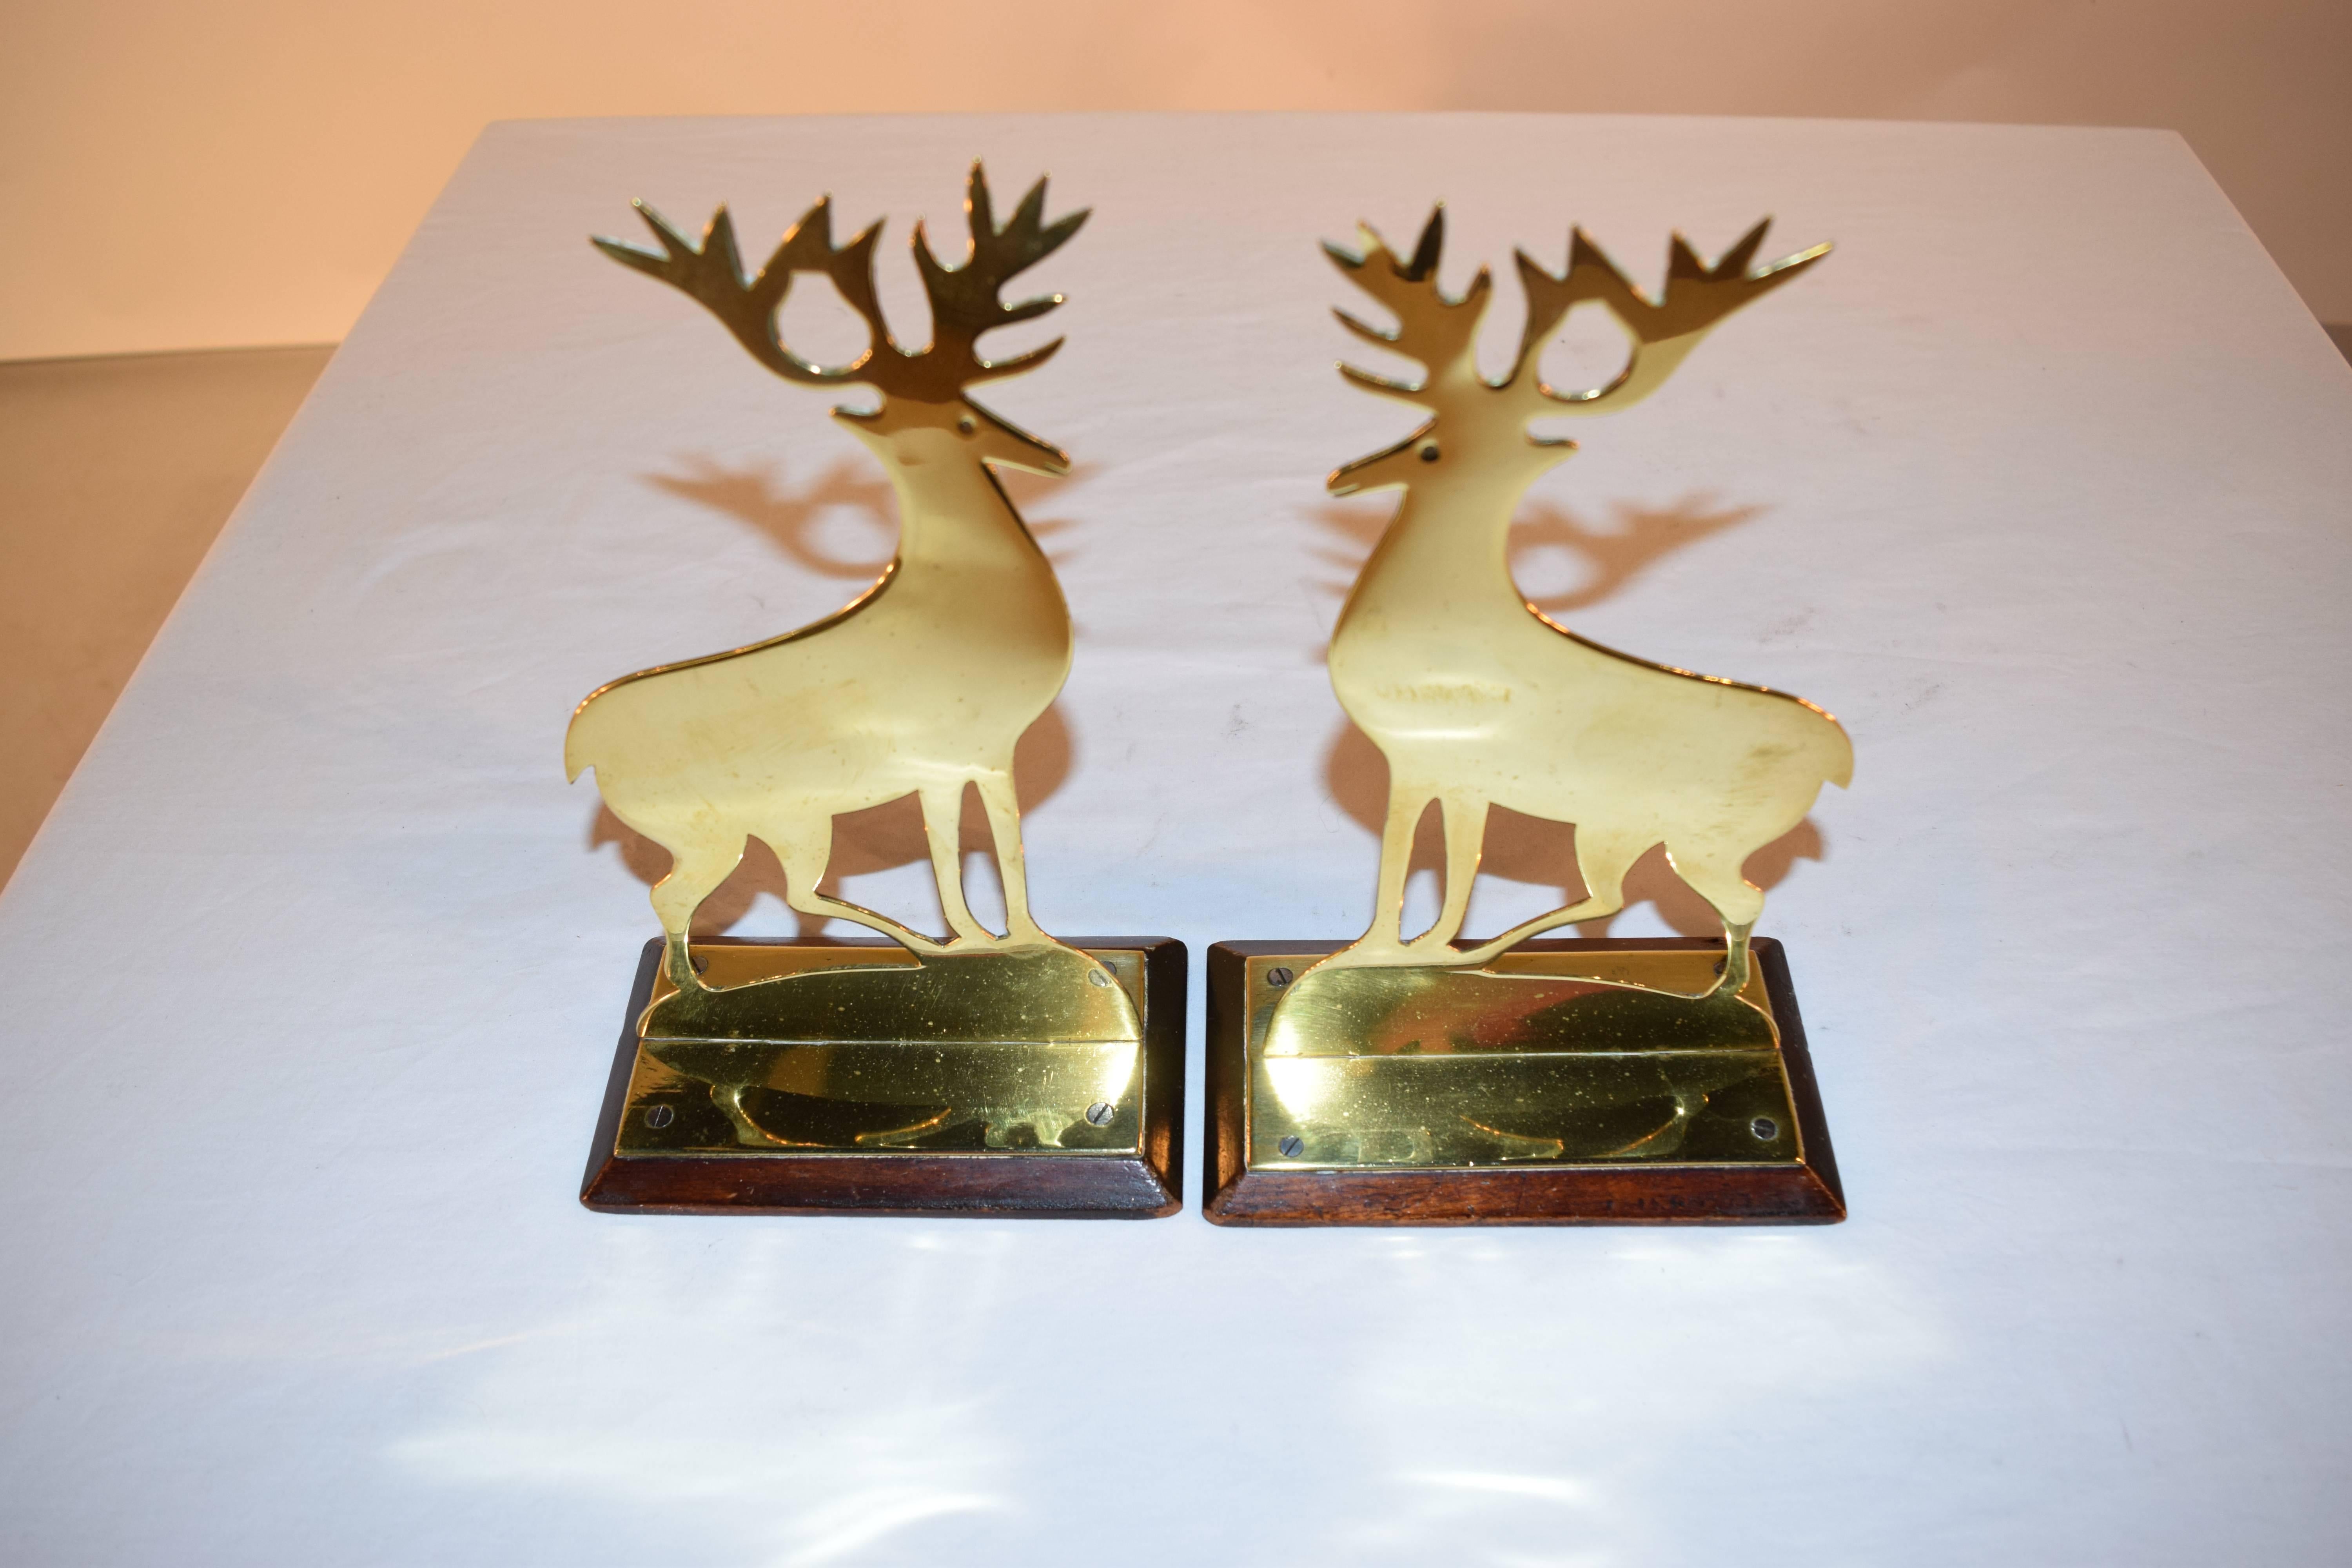 19th century pair of brass mantel decorations from England in the shape of stags on wooden bases.